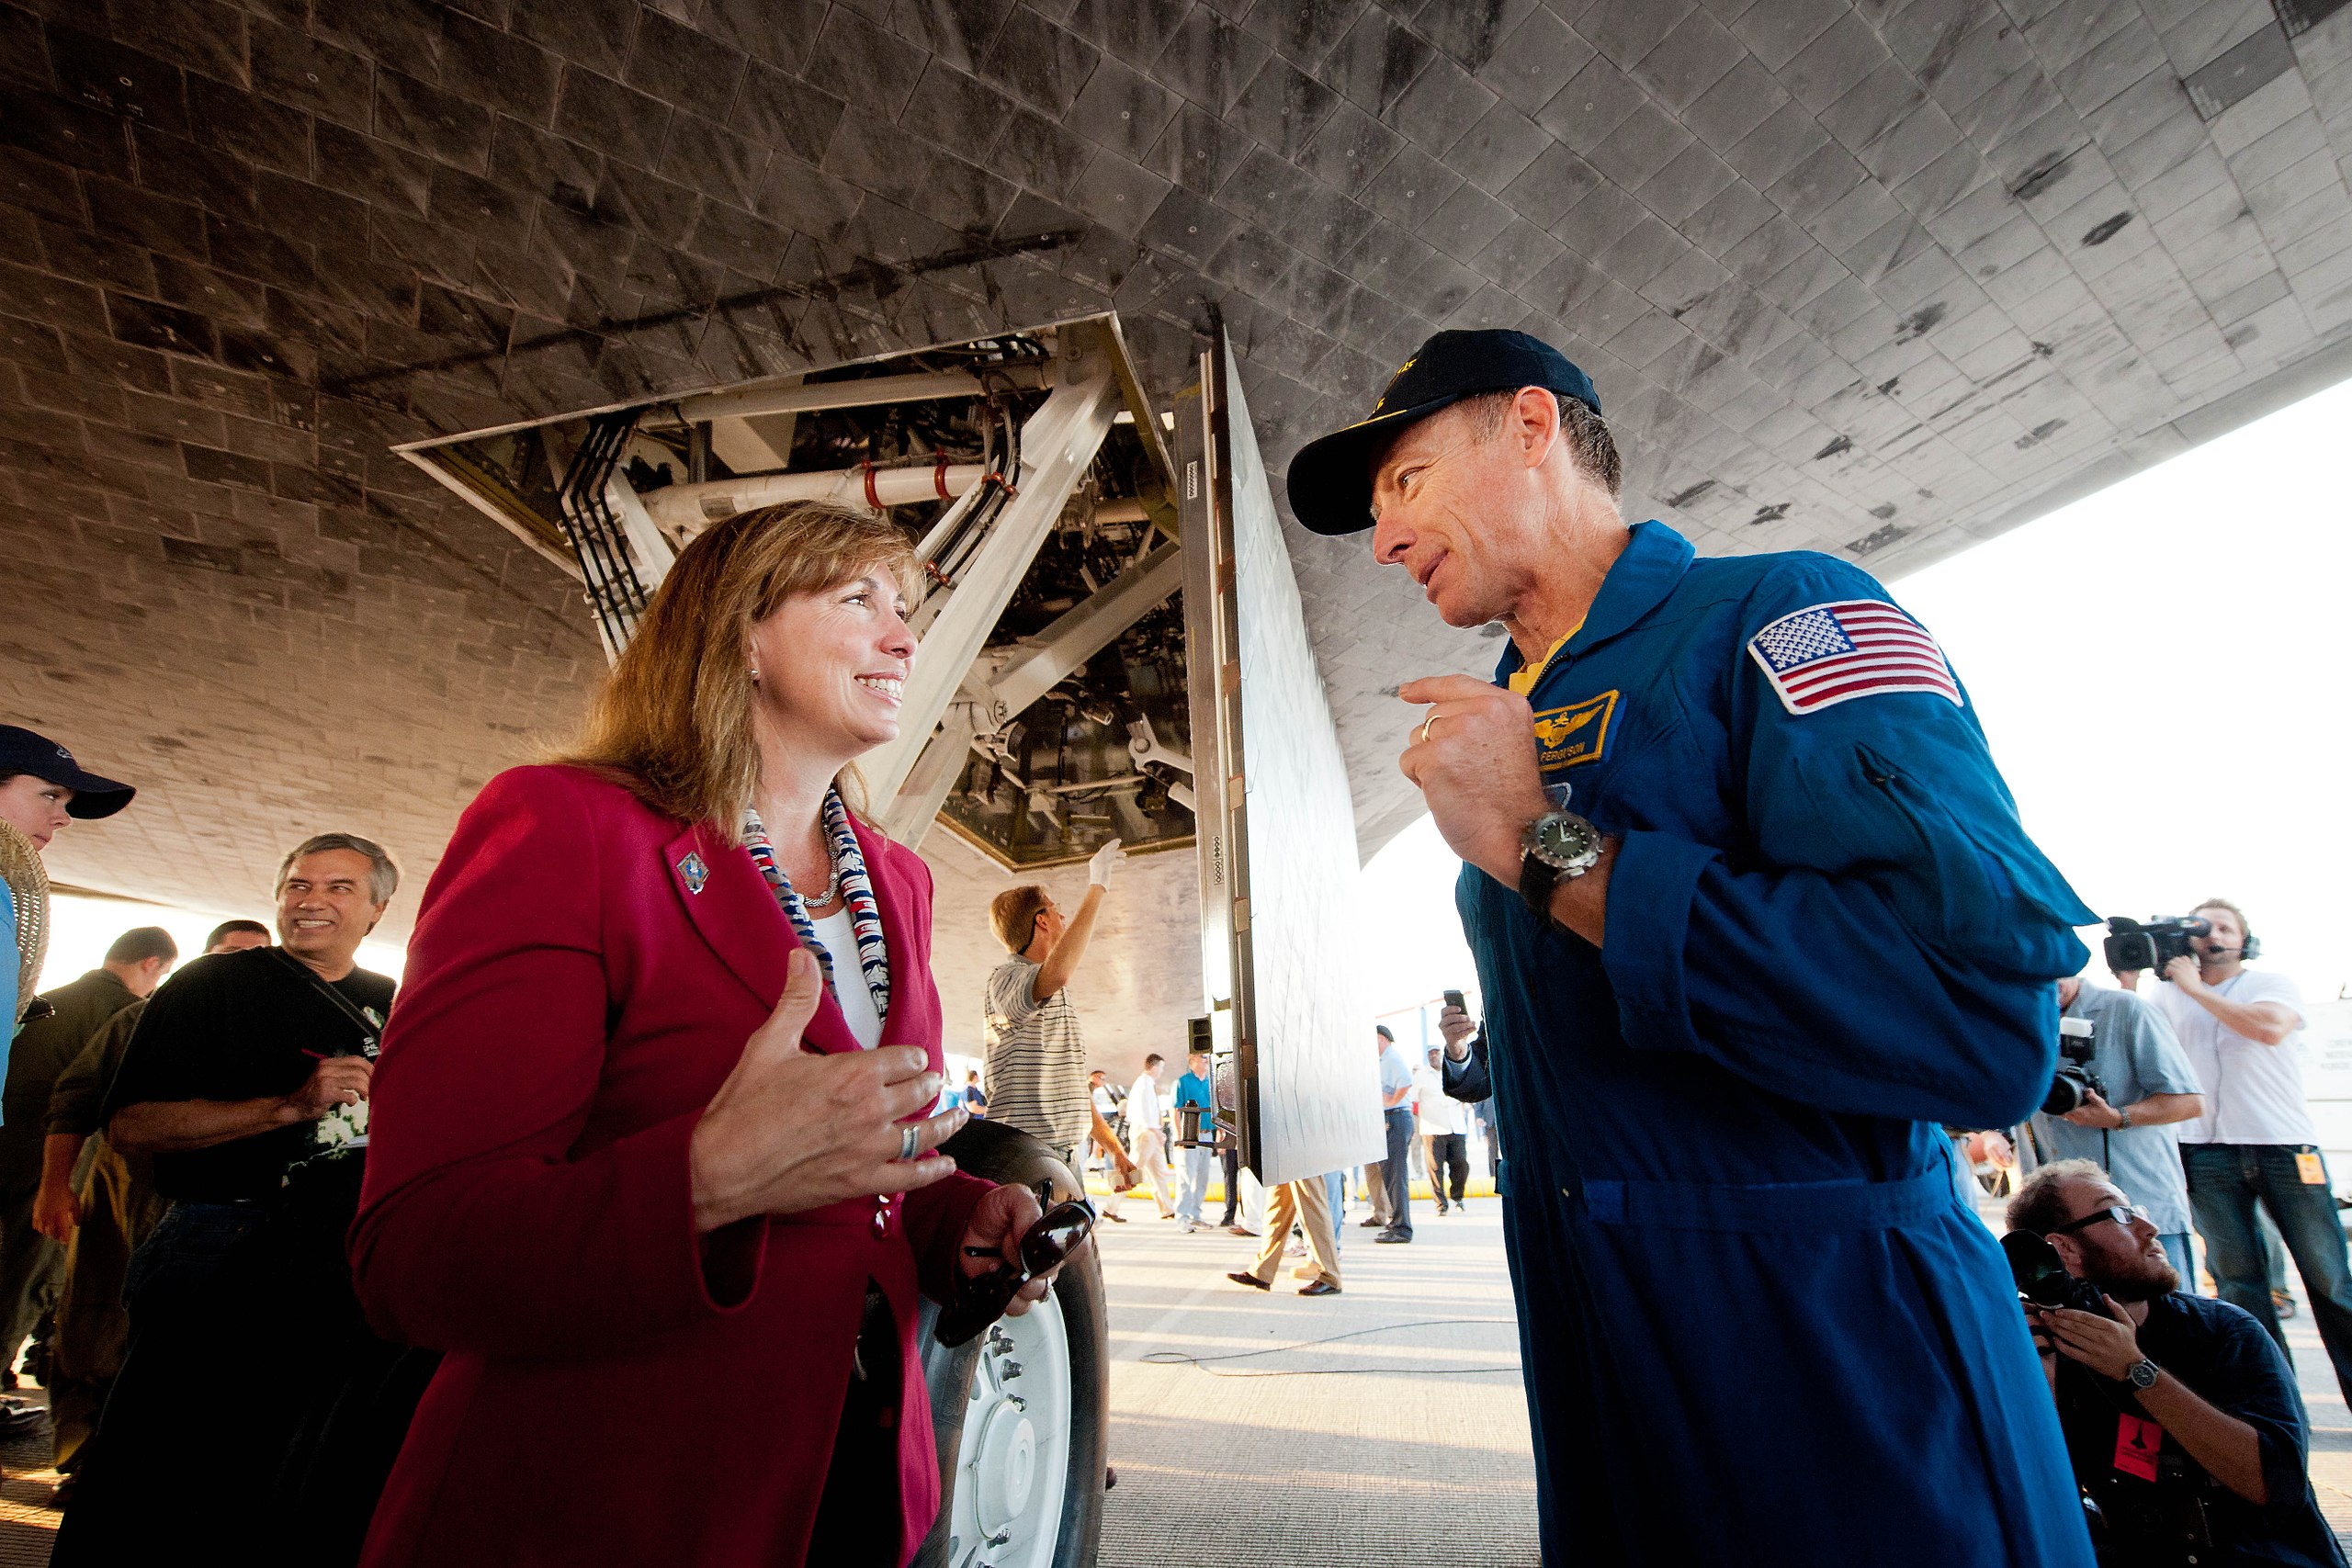 NASA Deputy Administrator Lori Garver and Commander Chris Ferguson talk underneath the space shuttle Atlantis shortly after Ferguson and the rest of the STS-135 crew landed at NASA's Kennedy Space Center Shuttle Landing Facility (SLF) in July 2011.